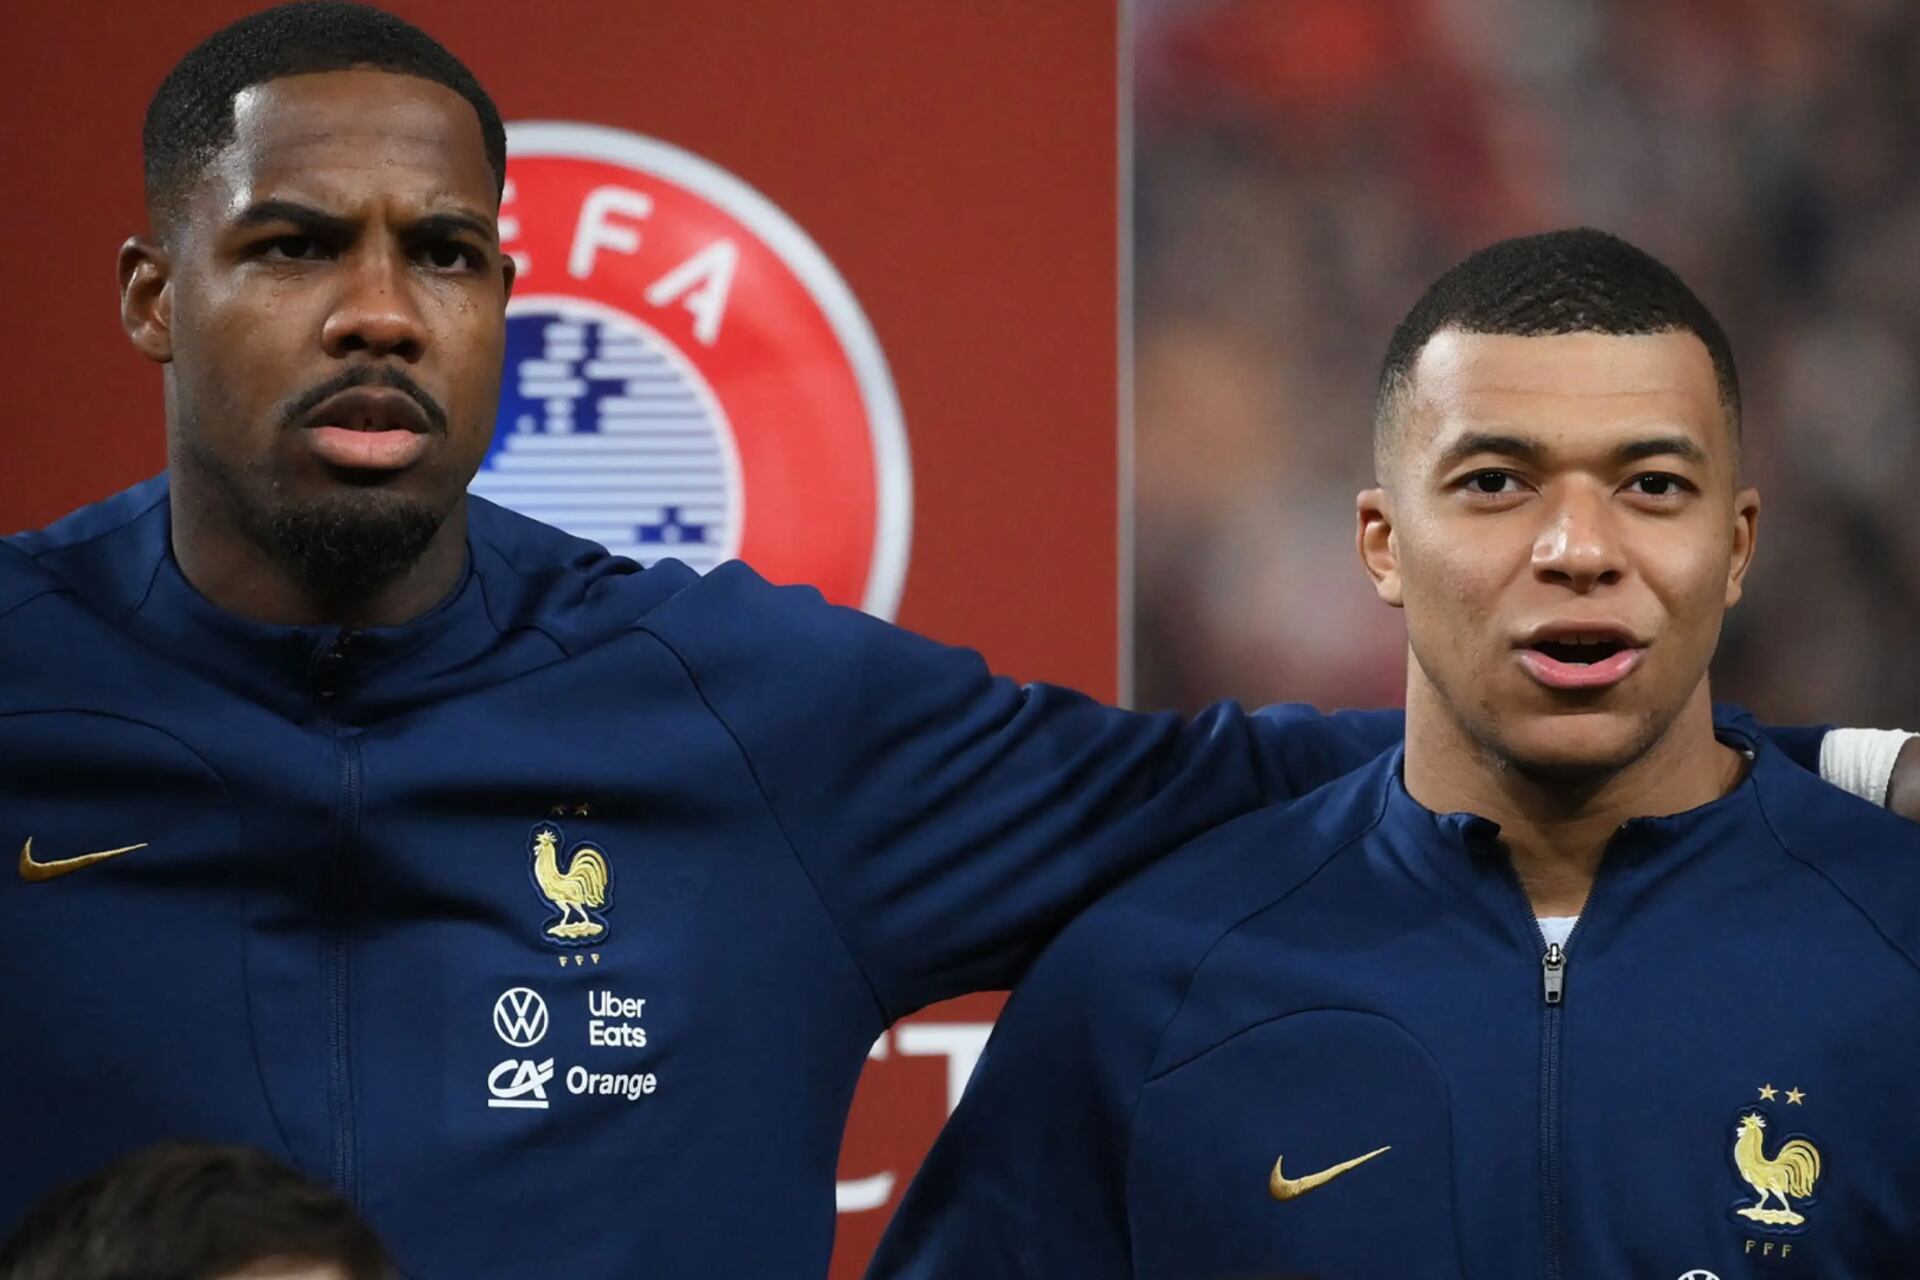 Painful situation, Kylian Mbappé supports his teammate after suffering racism